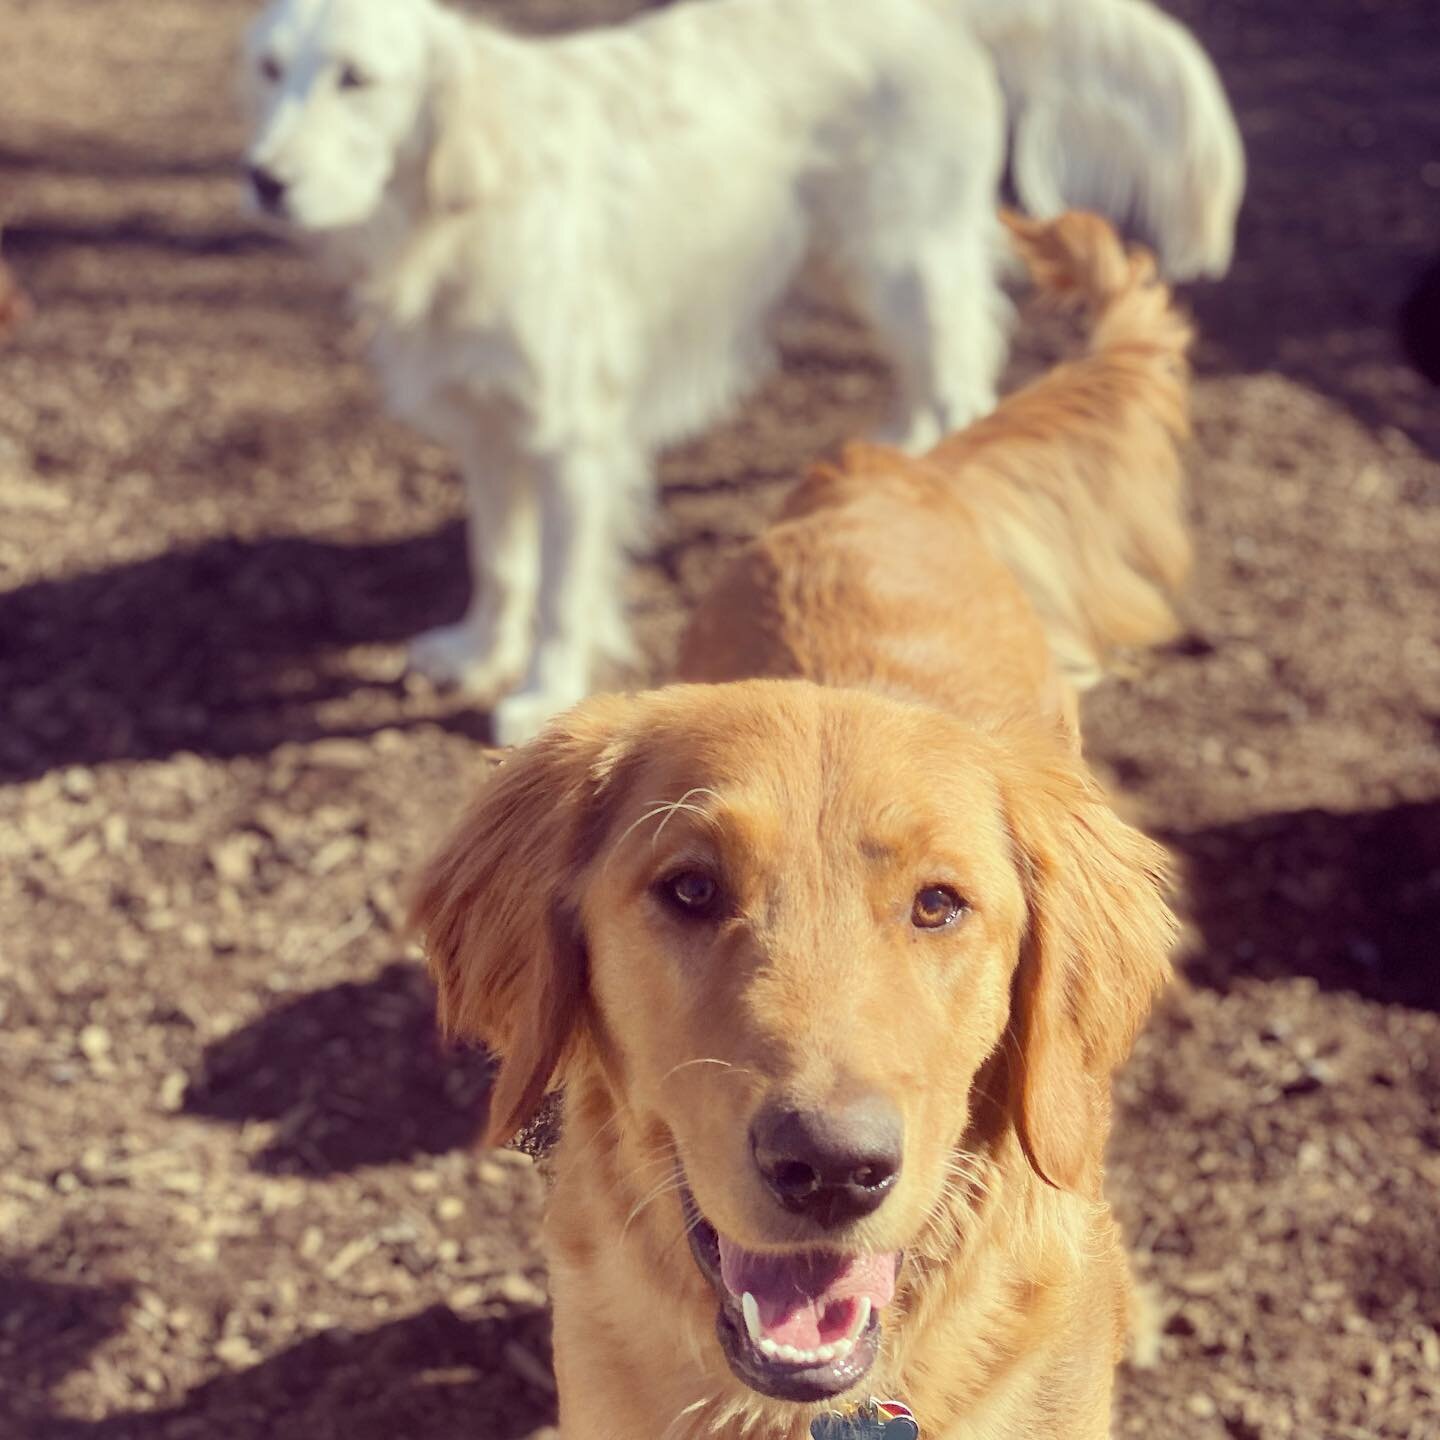 These guys never disappoint&mdash; Friday&rsquo;s Pack Pics are filled with a hilarious series of awkward moments! 📸 Enjoy!! &hearts;️🐾
-
More pics on Facebook!!
-
#camplifehappylife🐾 #camplifehappylife #marshfieldtoday #dogsofinstagram #instadogs